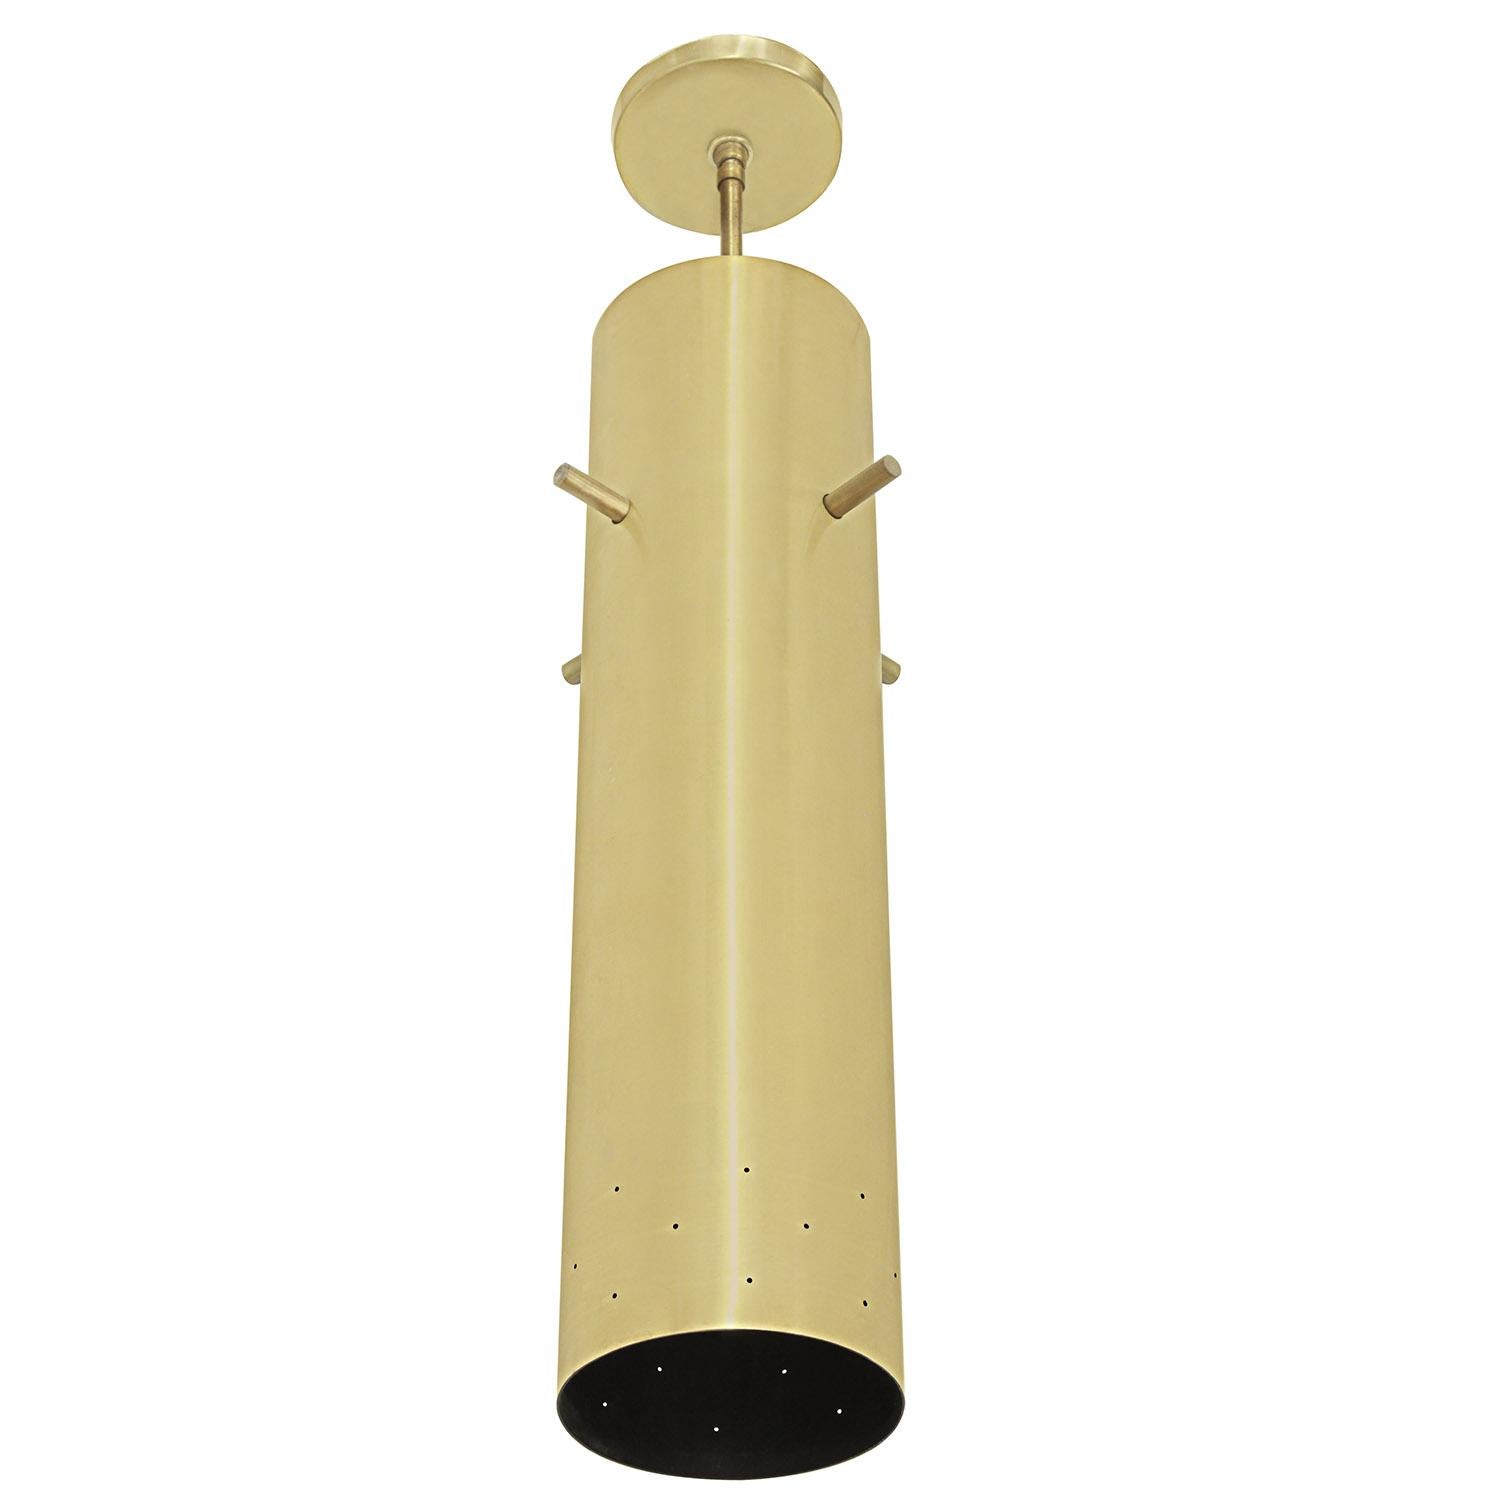 1 pendant light in brass with pin holes at bottom by Lightolier, American, 1950s. The brass has been lacquered so it will not tarnish.